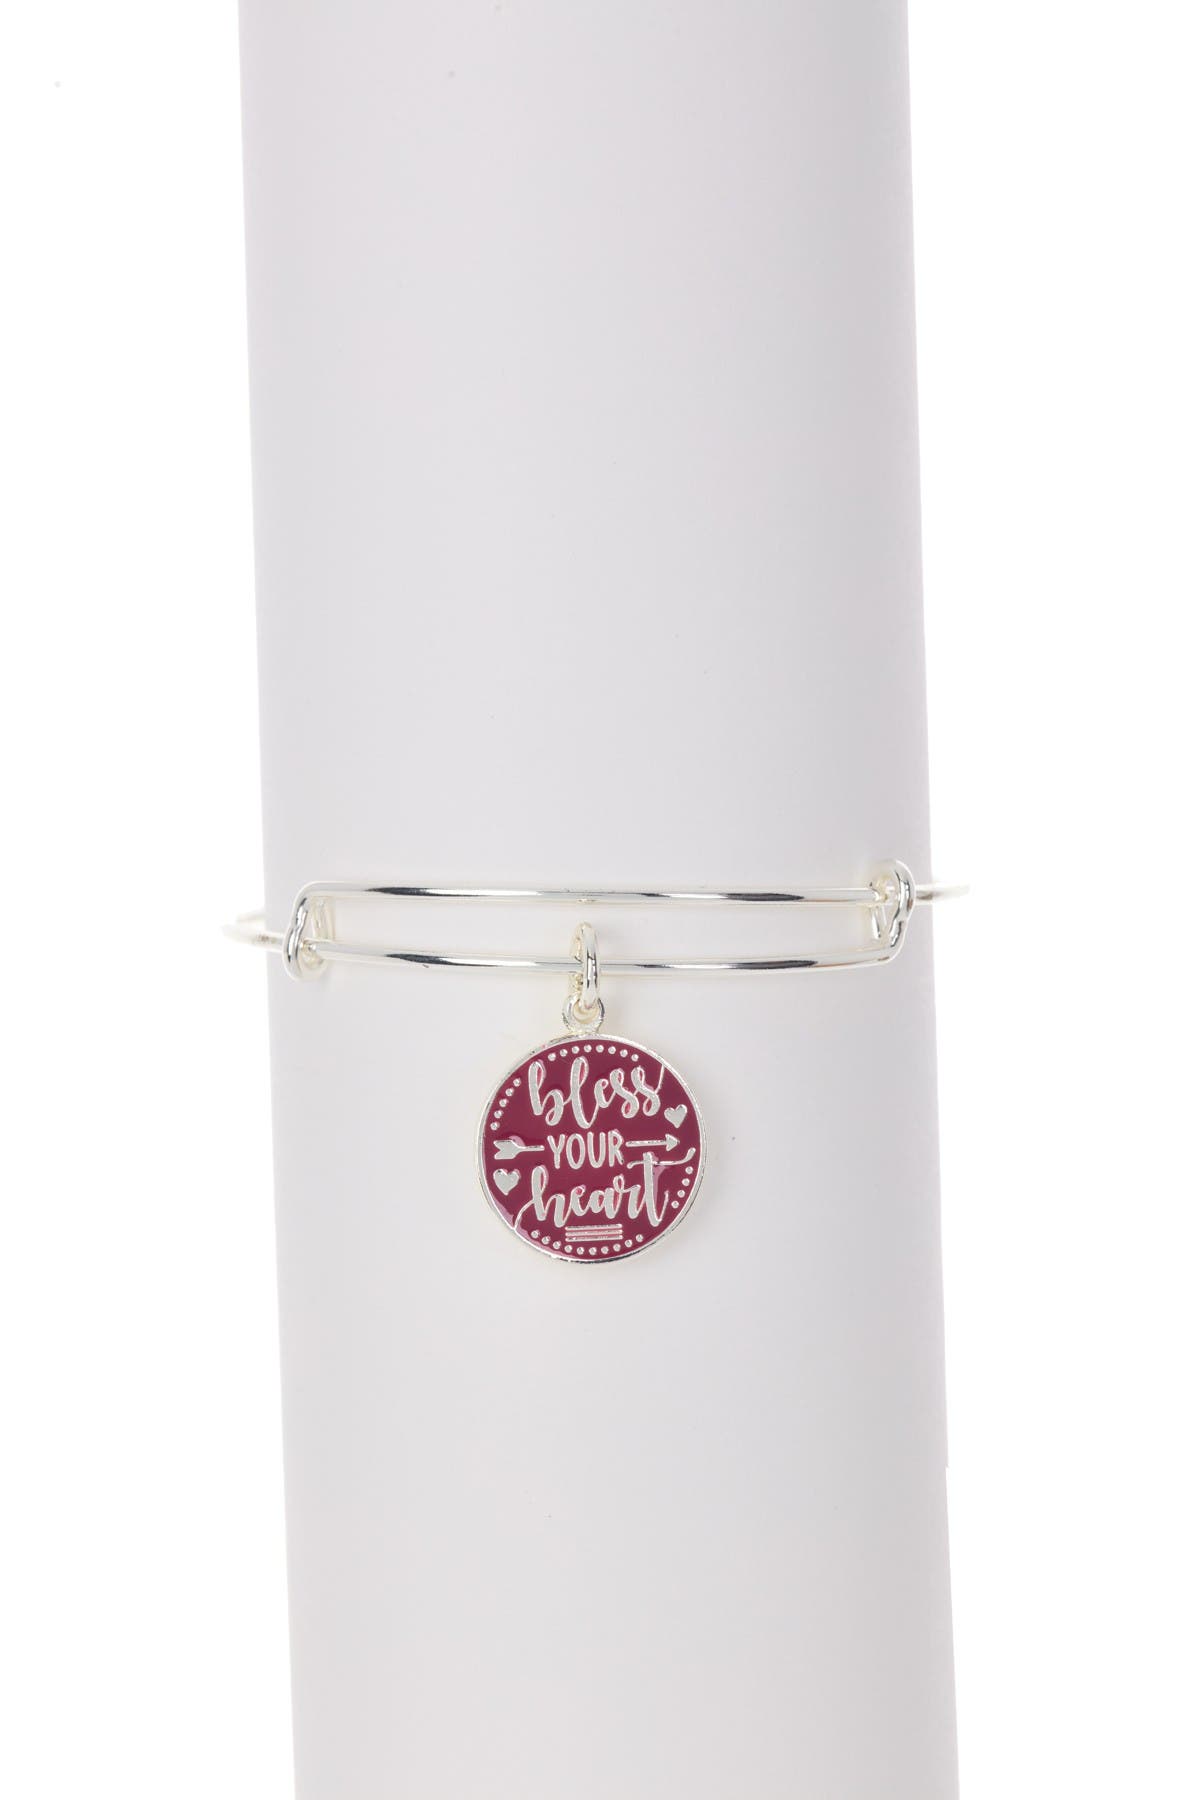 Alex And Ani Bless Your Heart Shiny Silver Finish Bangle In Shny Silv